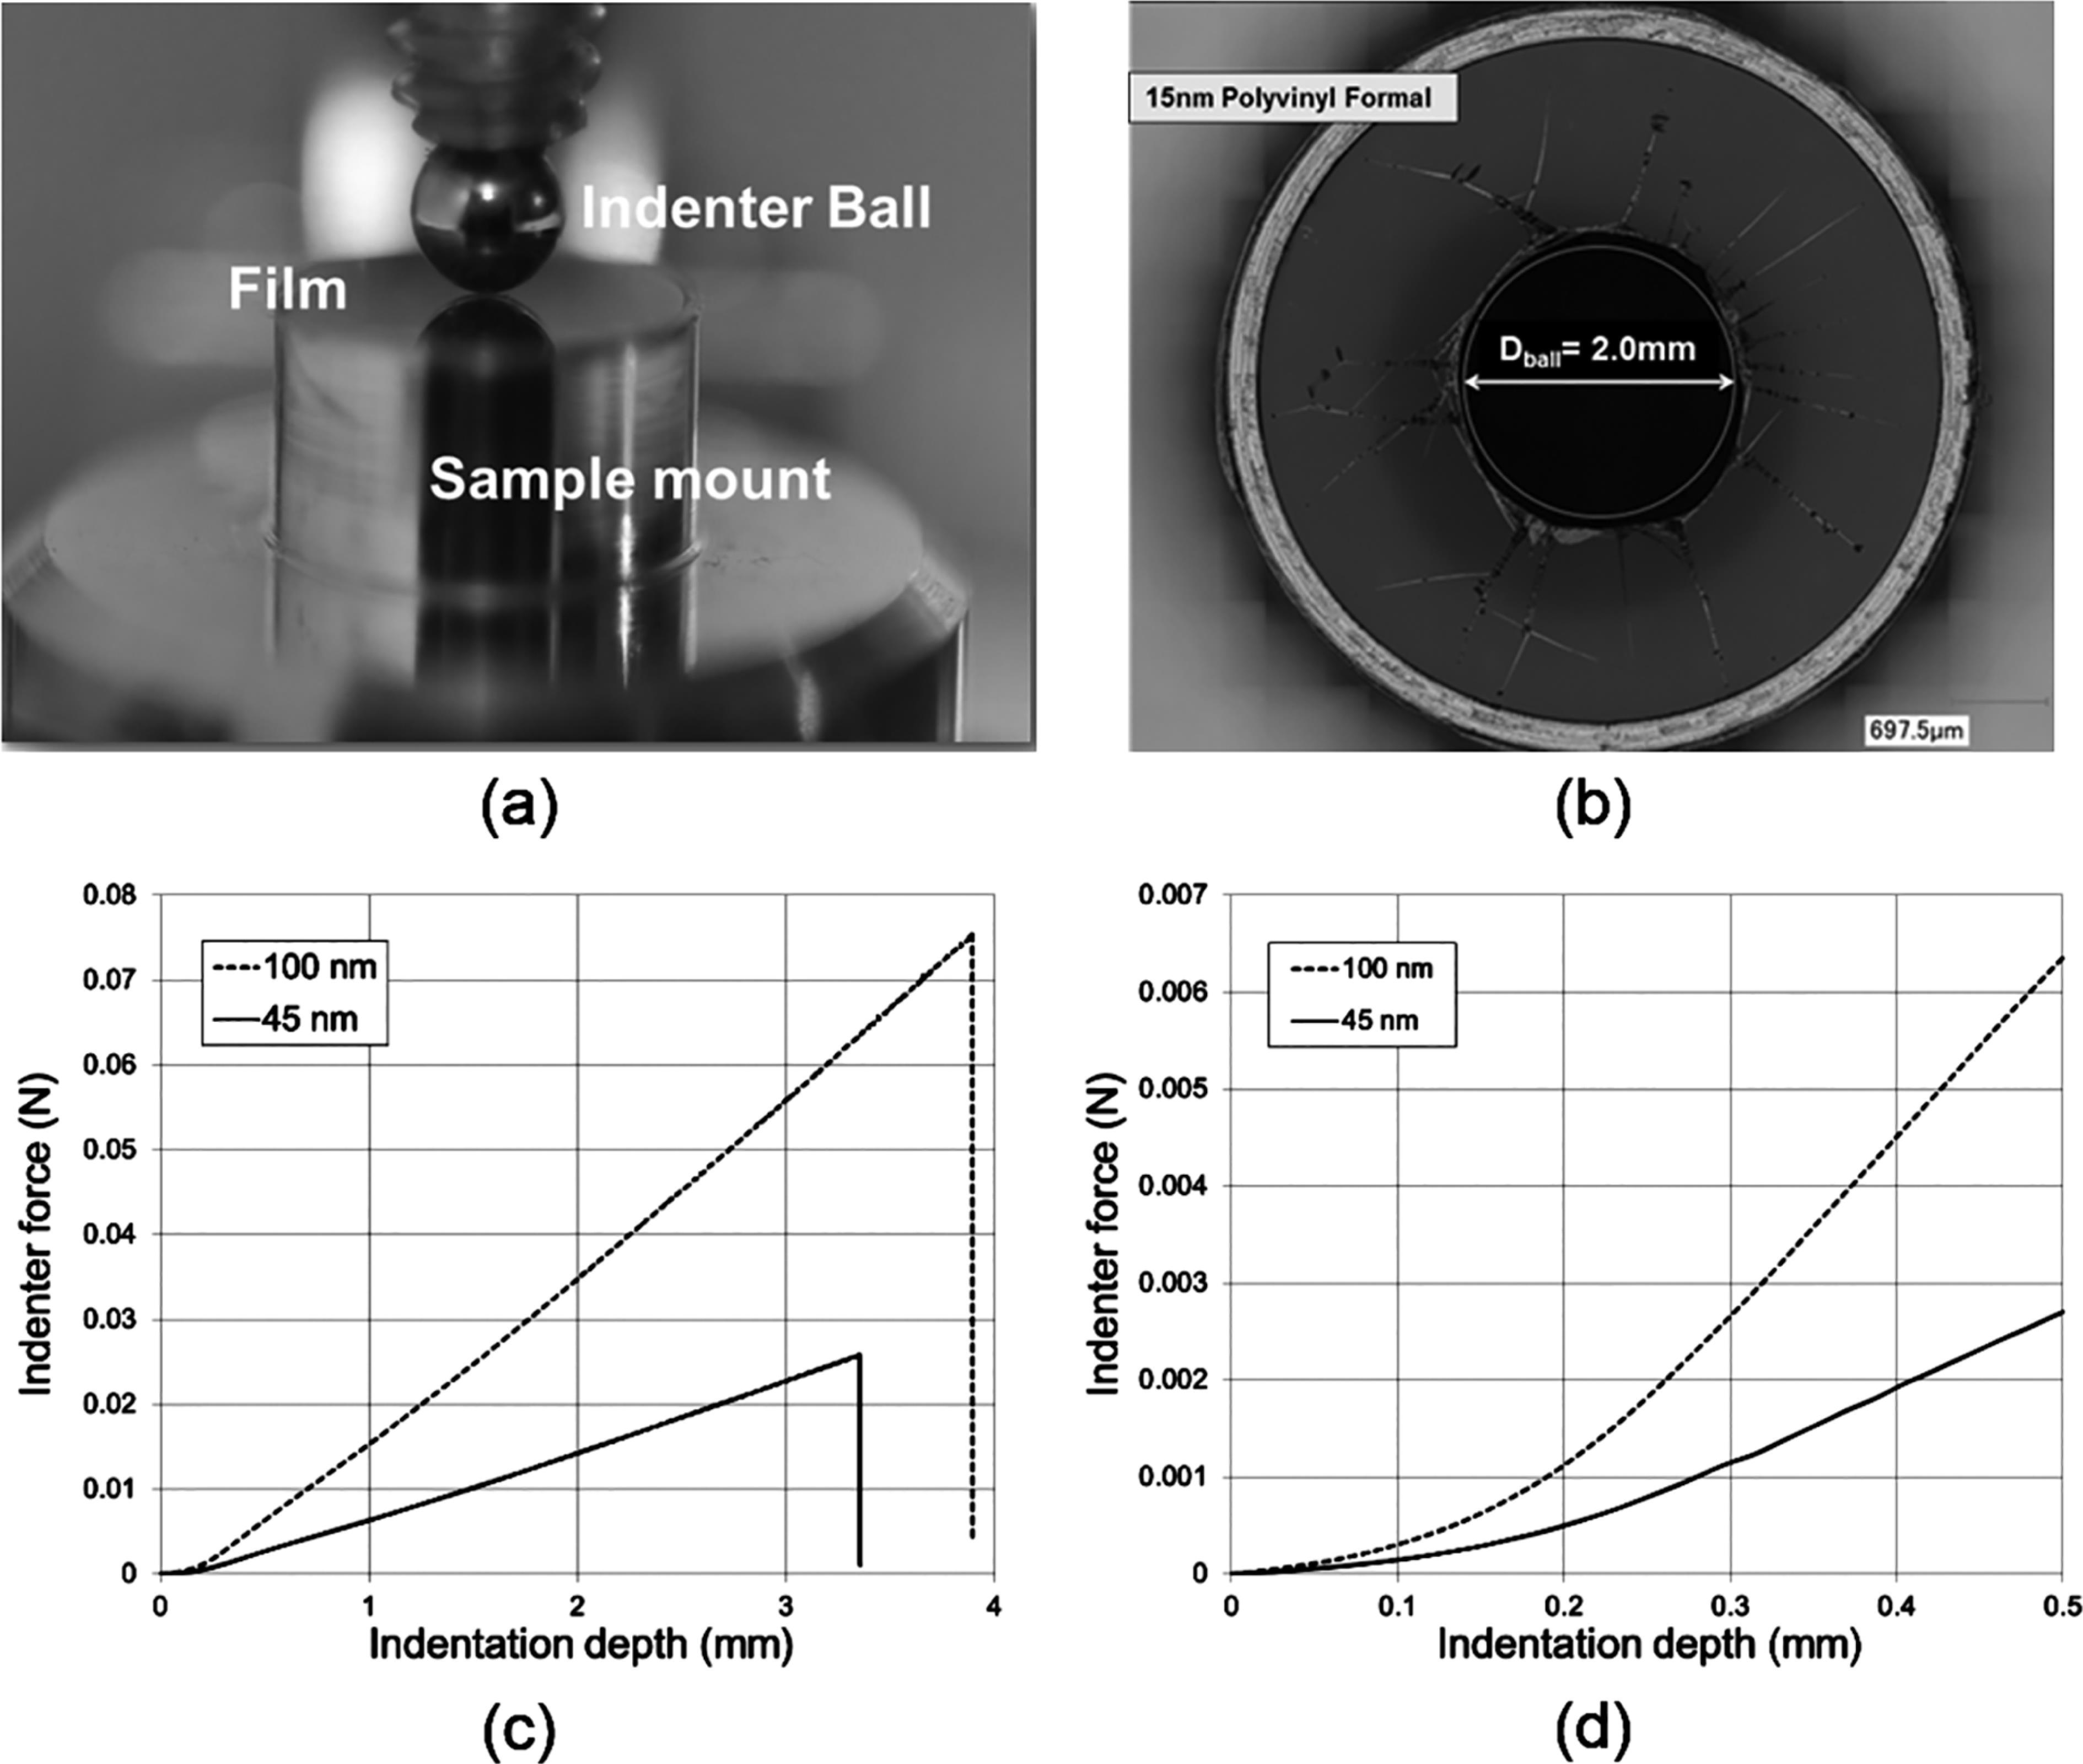 (a) Indentation test setup consisting of the film mounted onto a sample holder and the indenter ball on a threaded rod, (b) composite photomicrograph of a typical 15 nm polyvinyl formal film following indentation testing to failure. Note the presence of both circumferential and tangential folds suggesting radial and hoop stress induced deformation during loading. The presence and size of the circumferential rupture indicates the predominance of the radial stress state along the contact radius of the indenter, (c) typical curves for ball indenter test showing failure point. The early curve (d) has an almost cubic shape, while the larger indentation depths show an almost linear response.